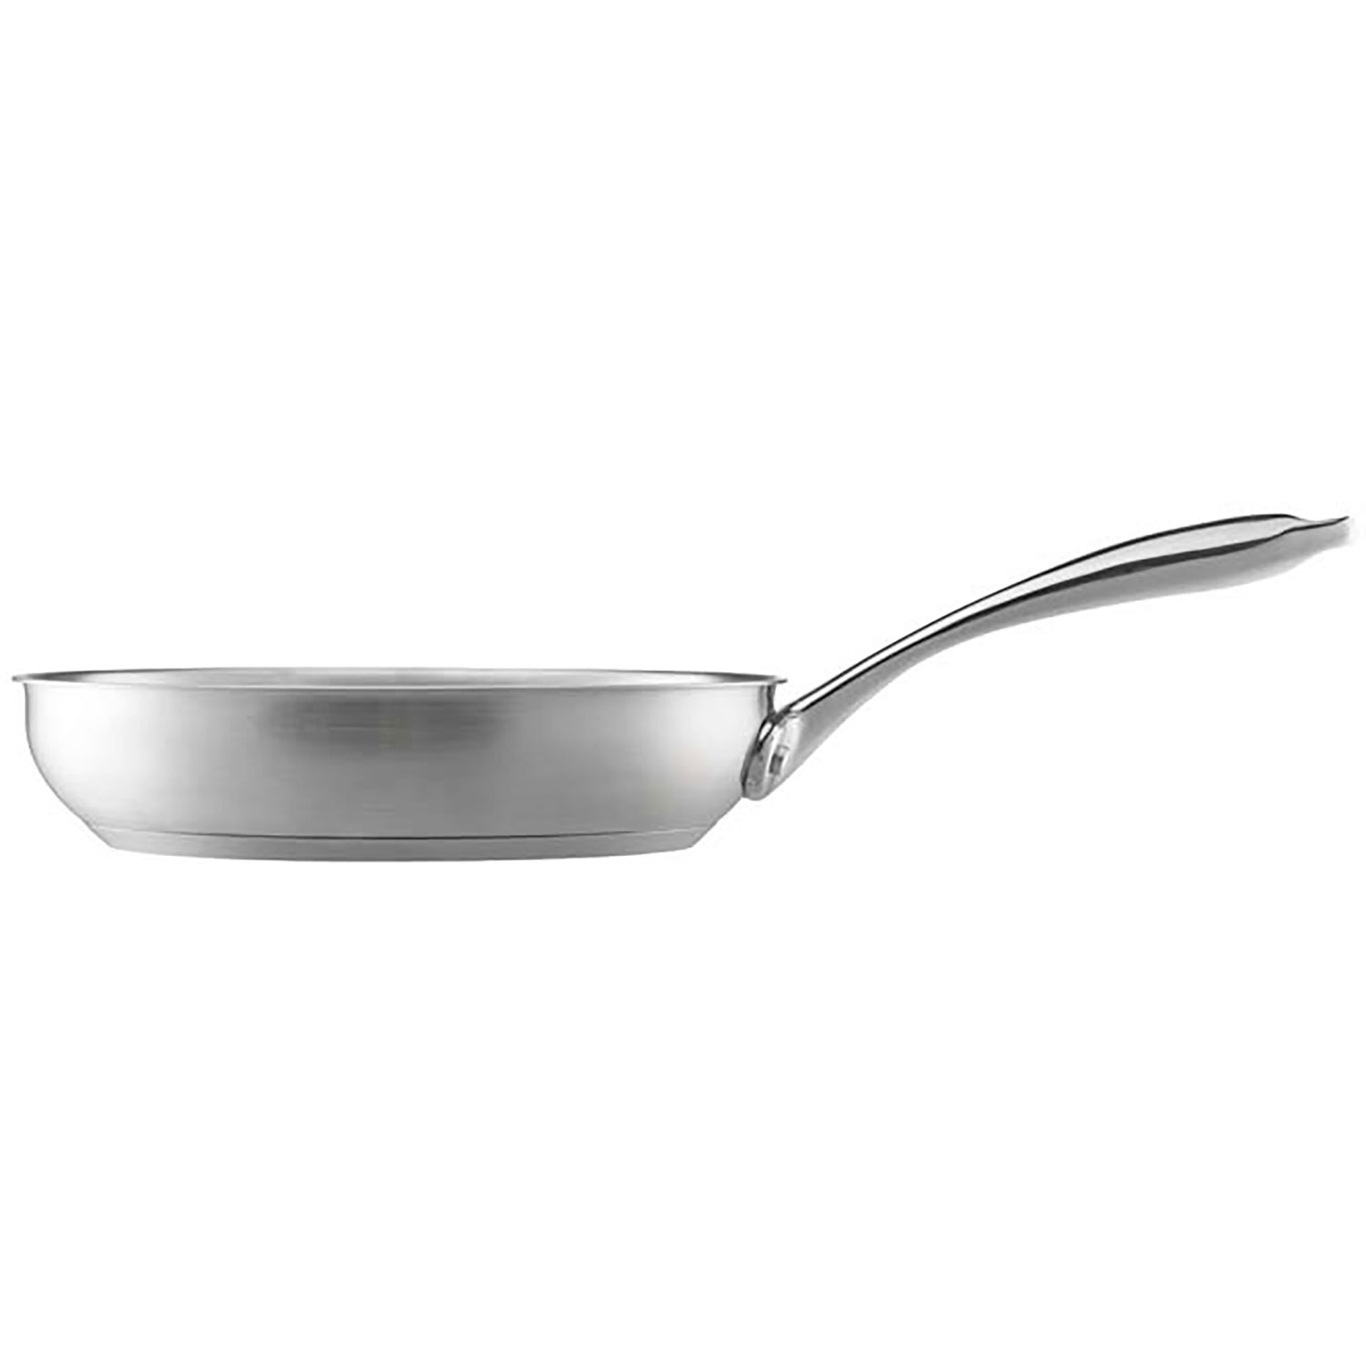 Steely Classic Frying Pan 24 cm